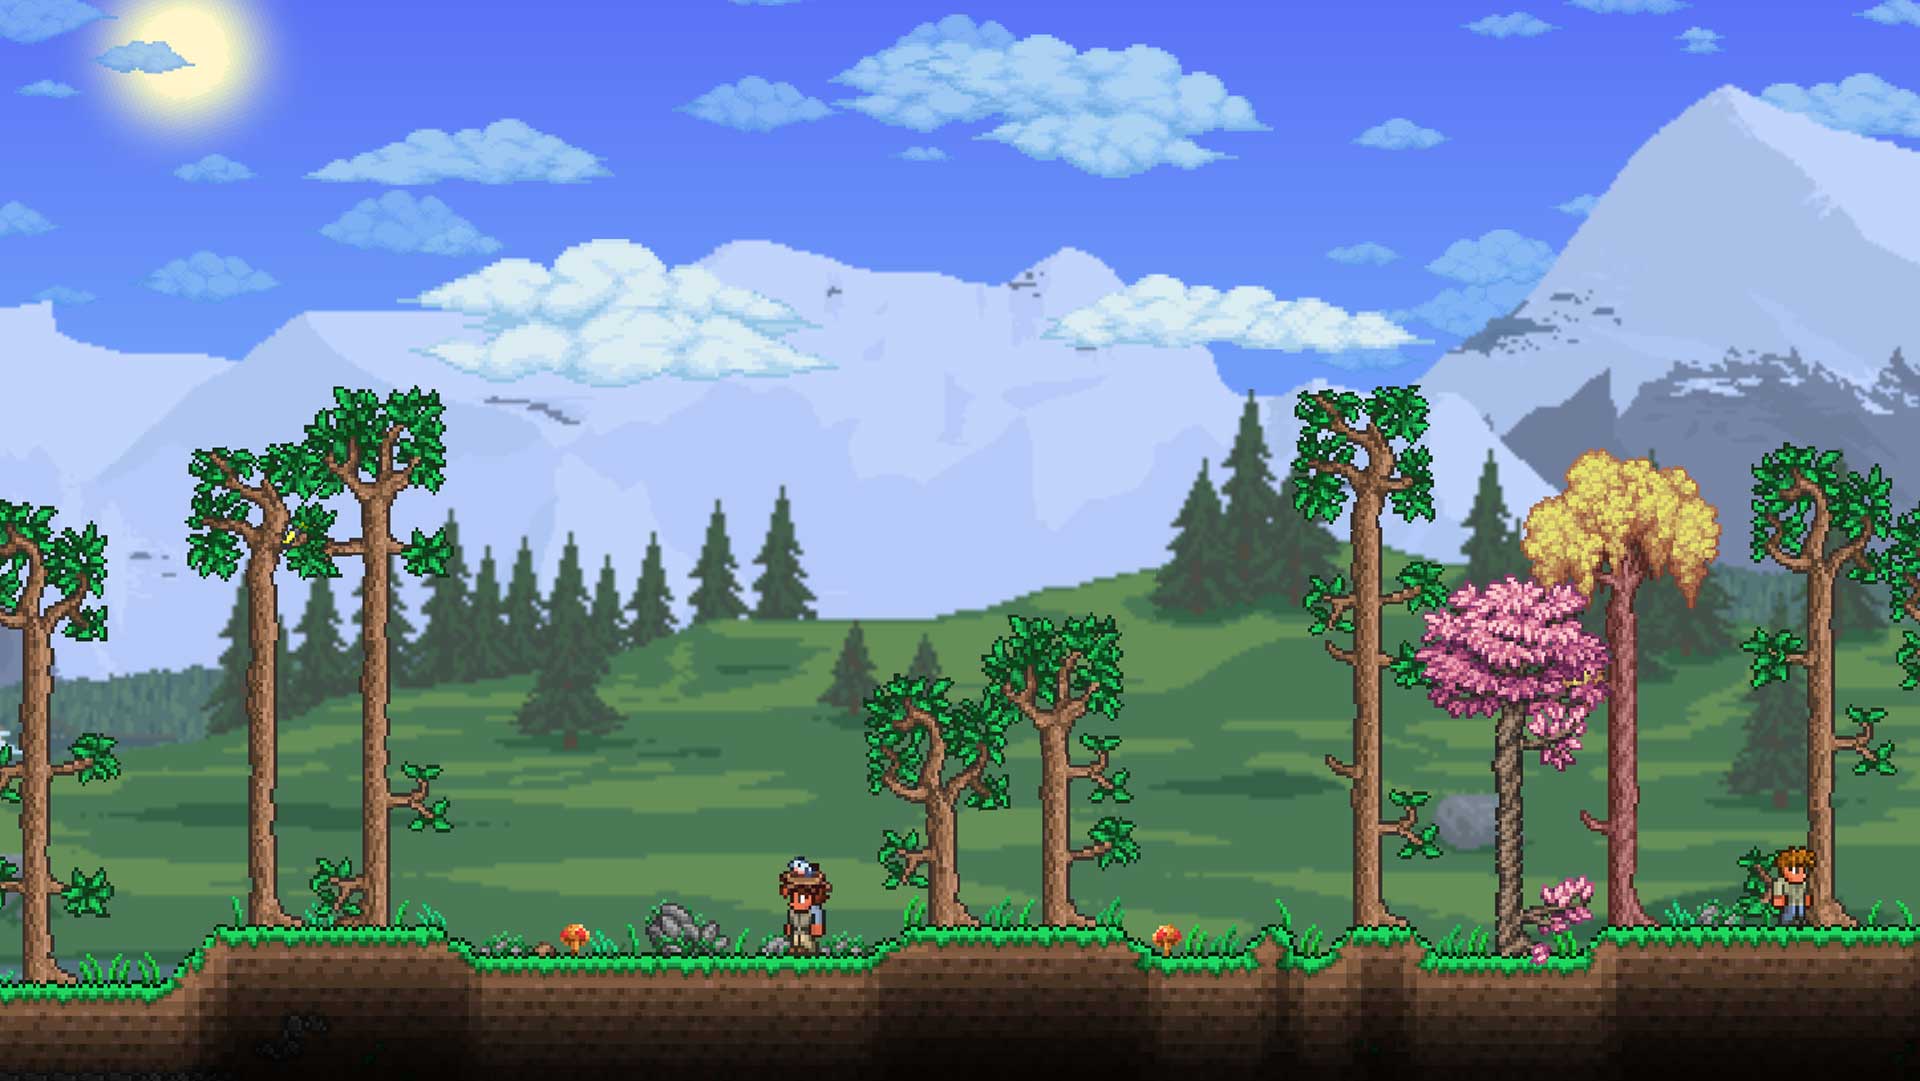 Terraria digs its way to the top spot in the App Store